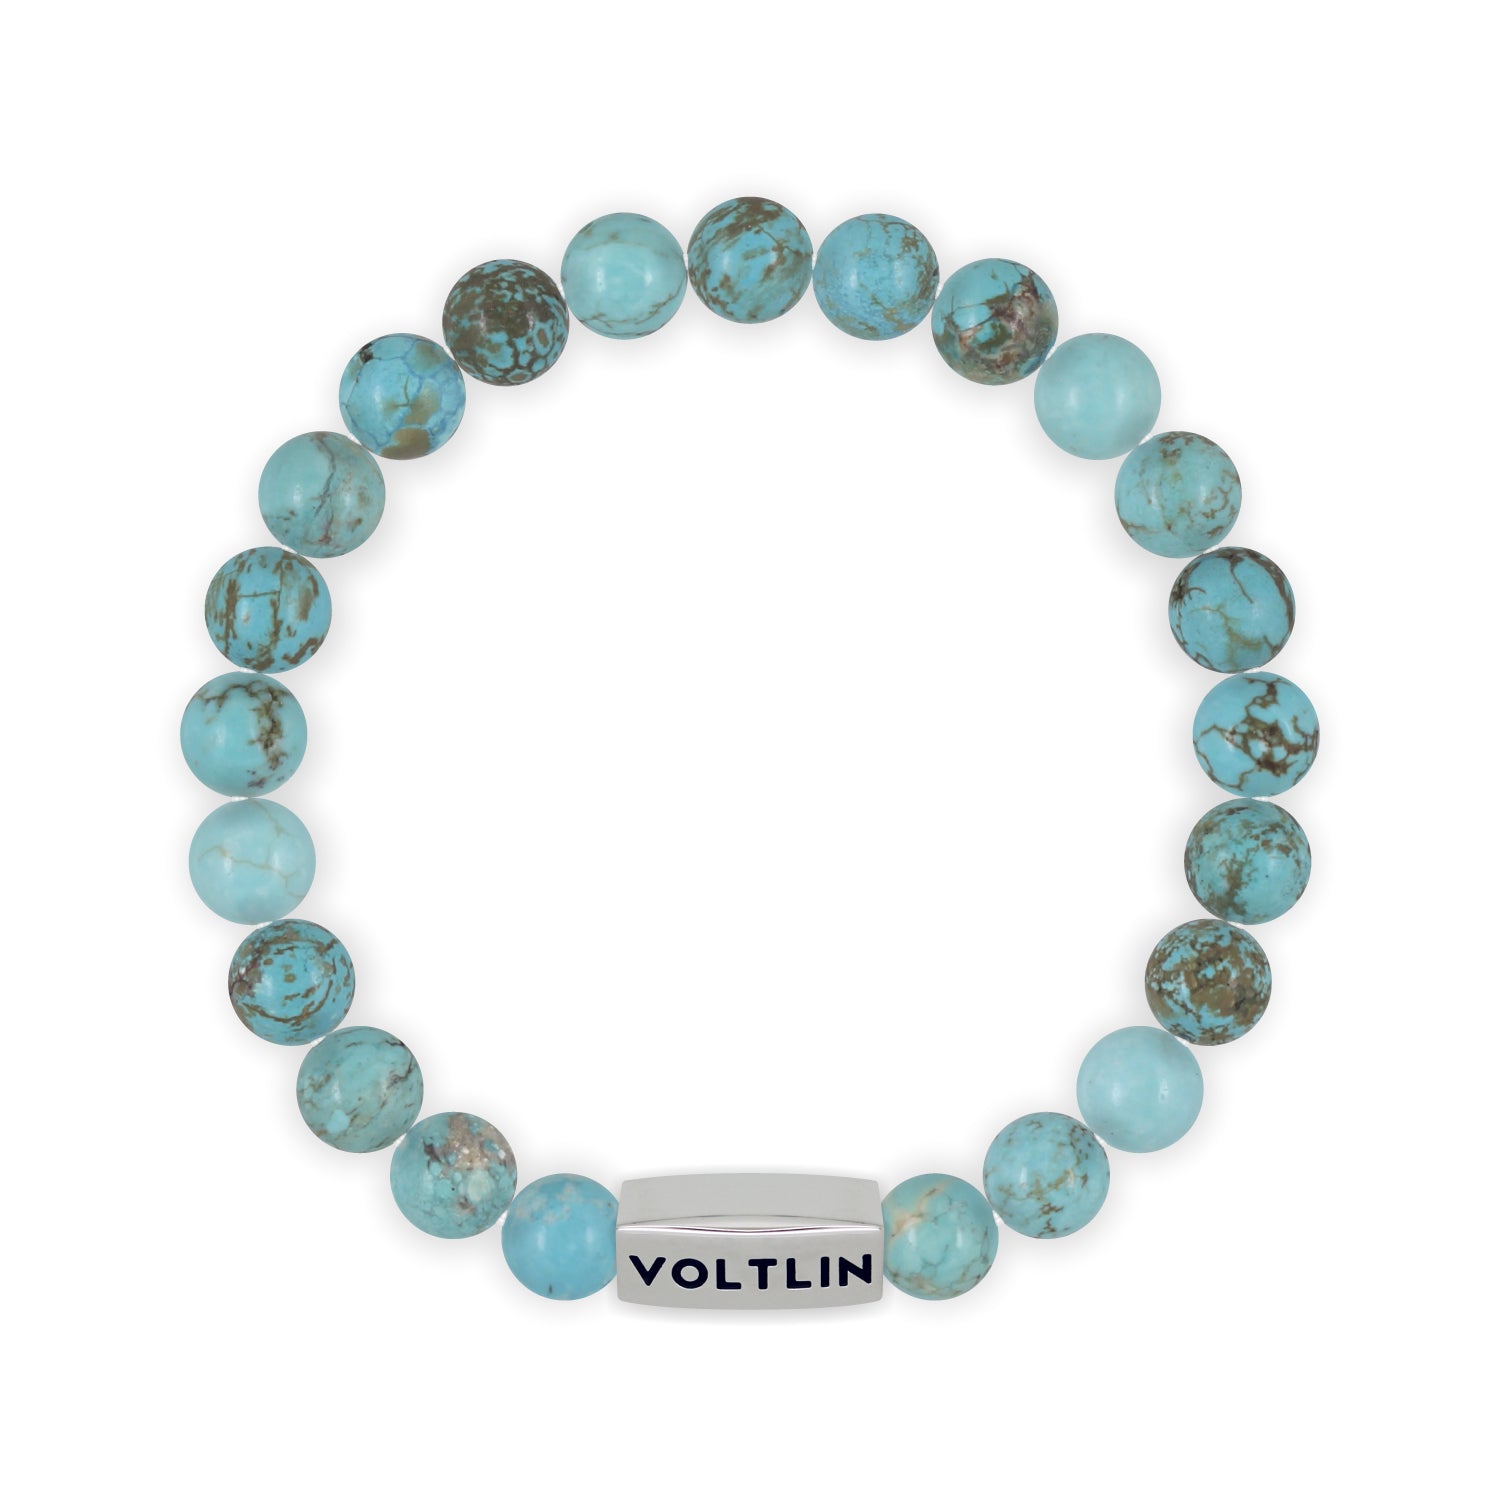 Front view of an 8mm Turquoise beaded stretch bracelet with silver stainless steel logo bead made by Voltlin